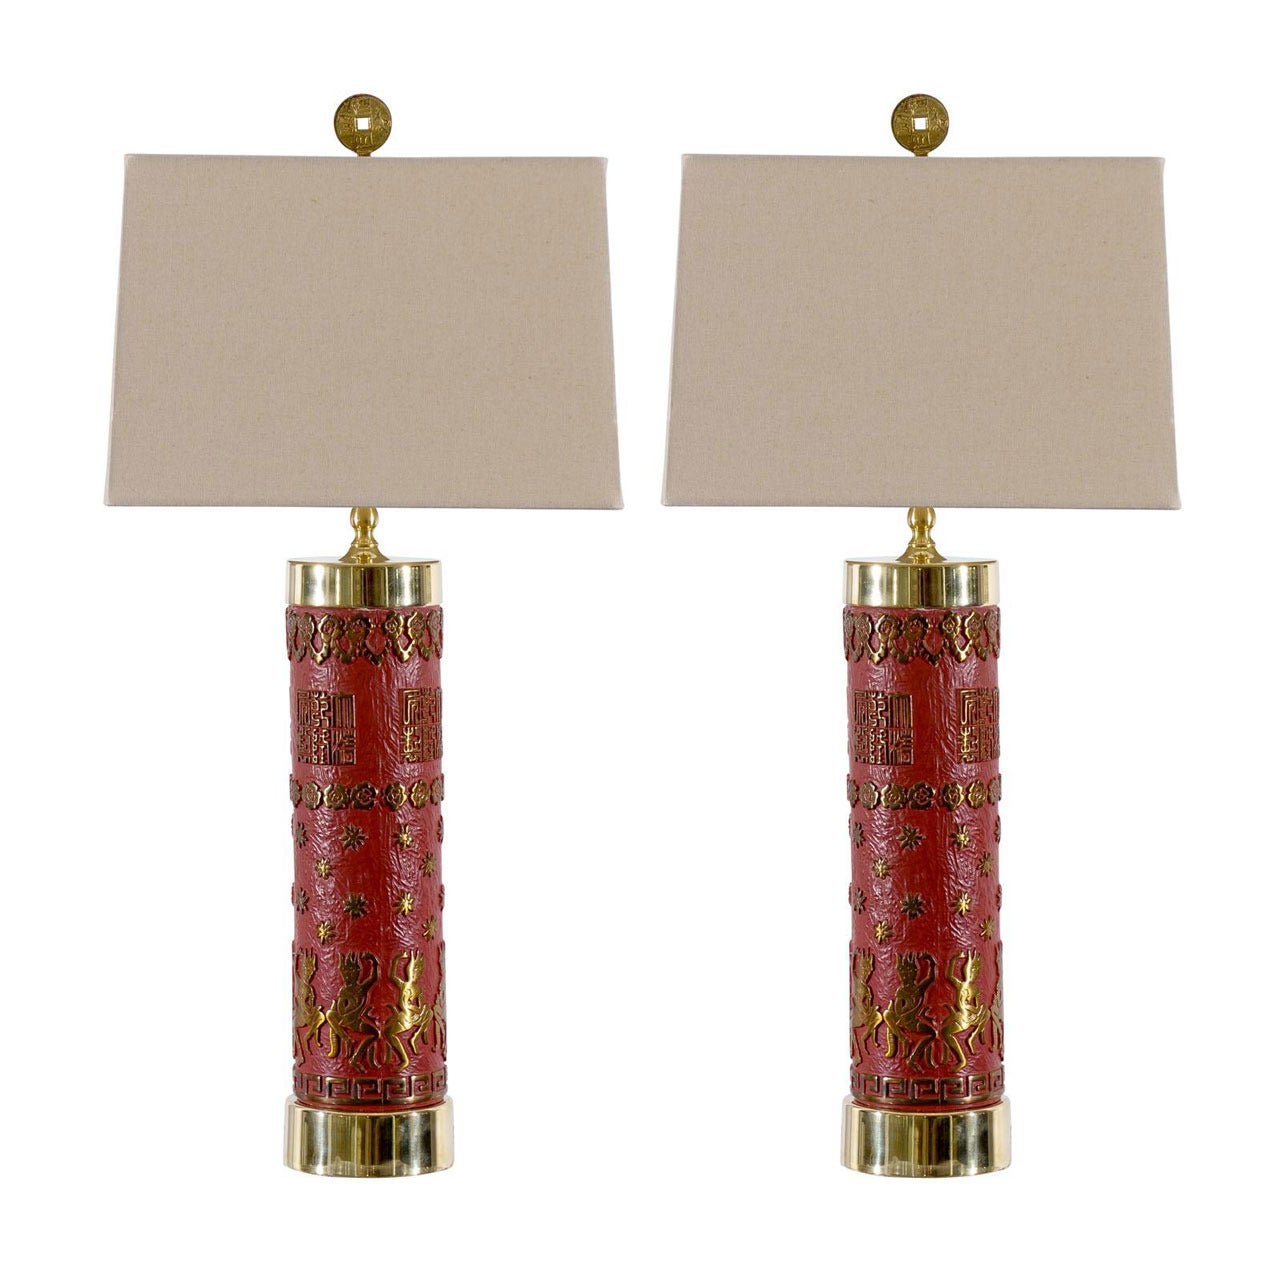 Fantastic Pair of Vintage Enamel and Brass Lamps For Sale